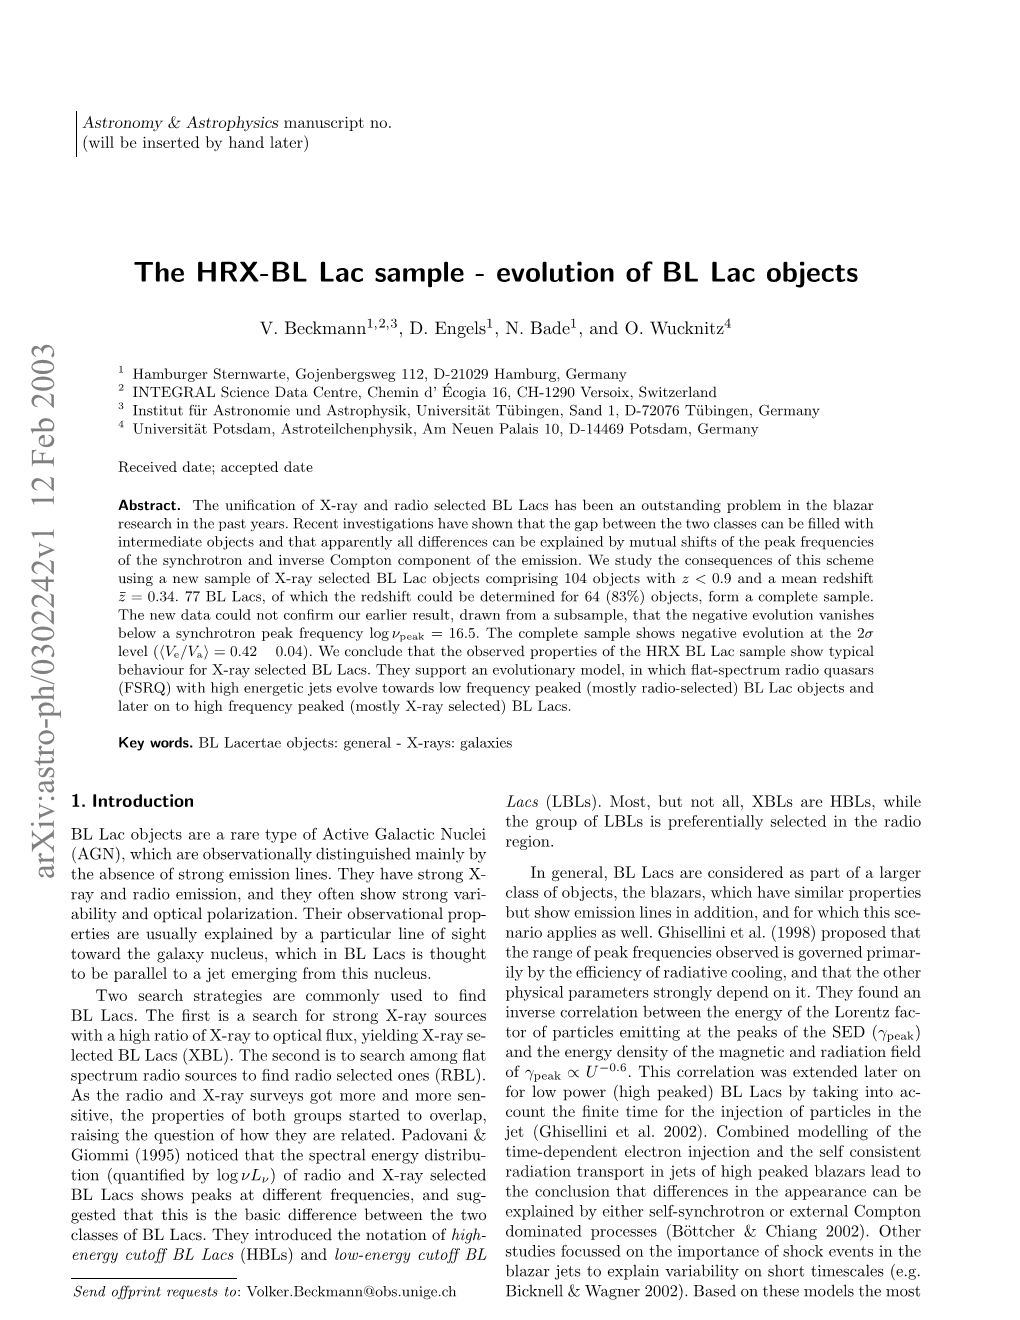 The HRX-BL Lac Sample-Evolution of BL Lac Objects